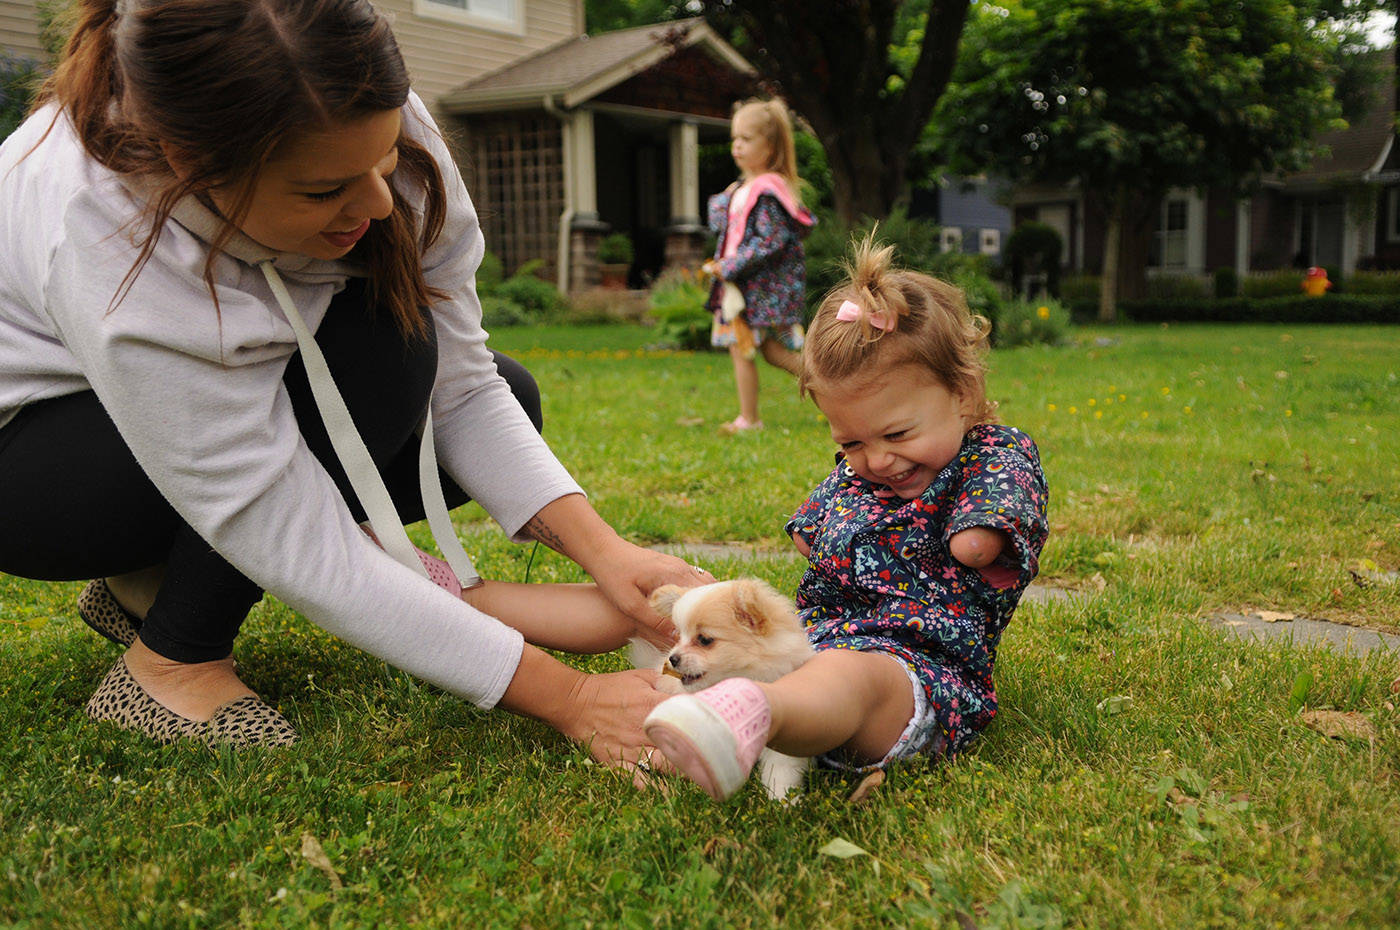 Two-year-old Ivy McLeod laughs while playing with Lucky the puppy outside their Chilliwack home on Thursday, June 10, 2021. (Jenna Hauck/ Chilliwack Progress)